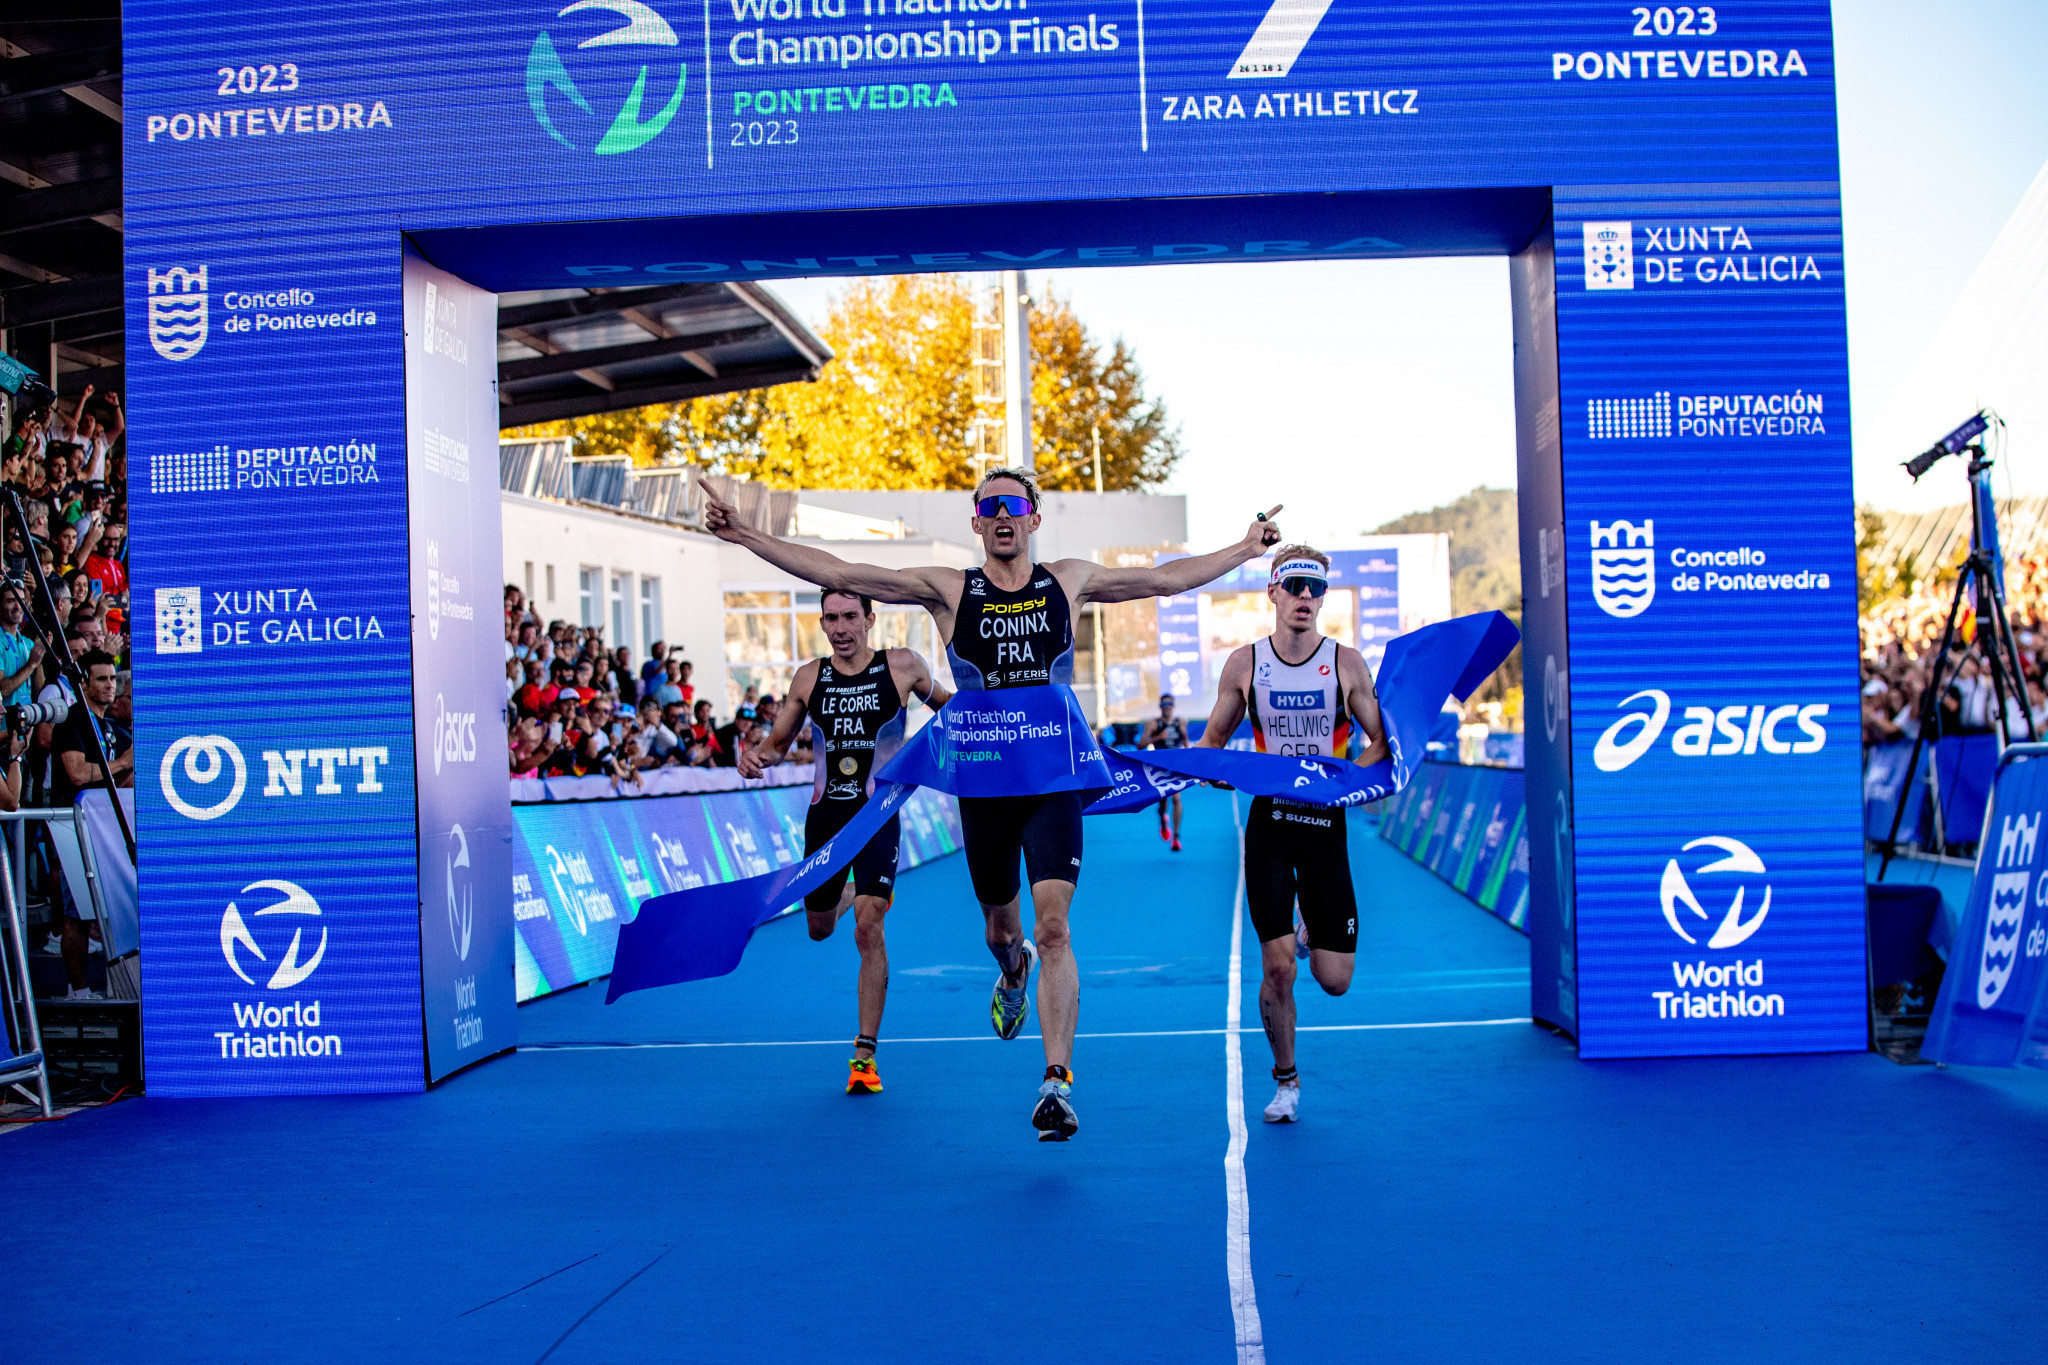 France's Dorian Coninx, centre, triumphed in a sprint to win the race in Pontevedra and the men's world title ©World Triathlon